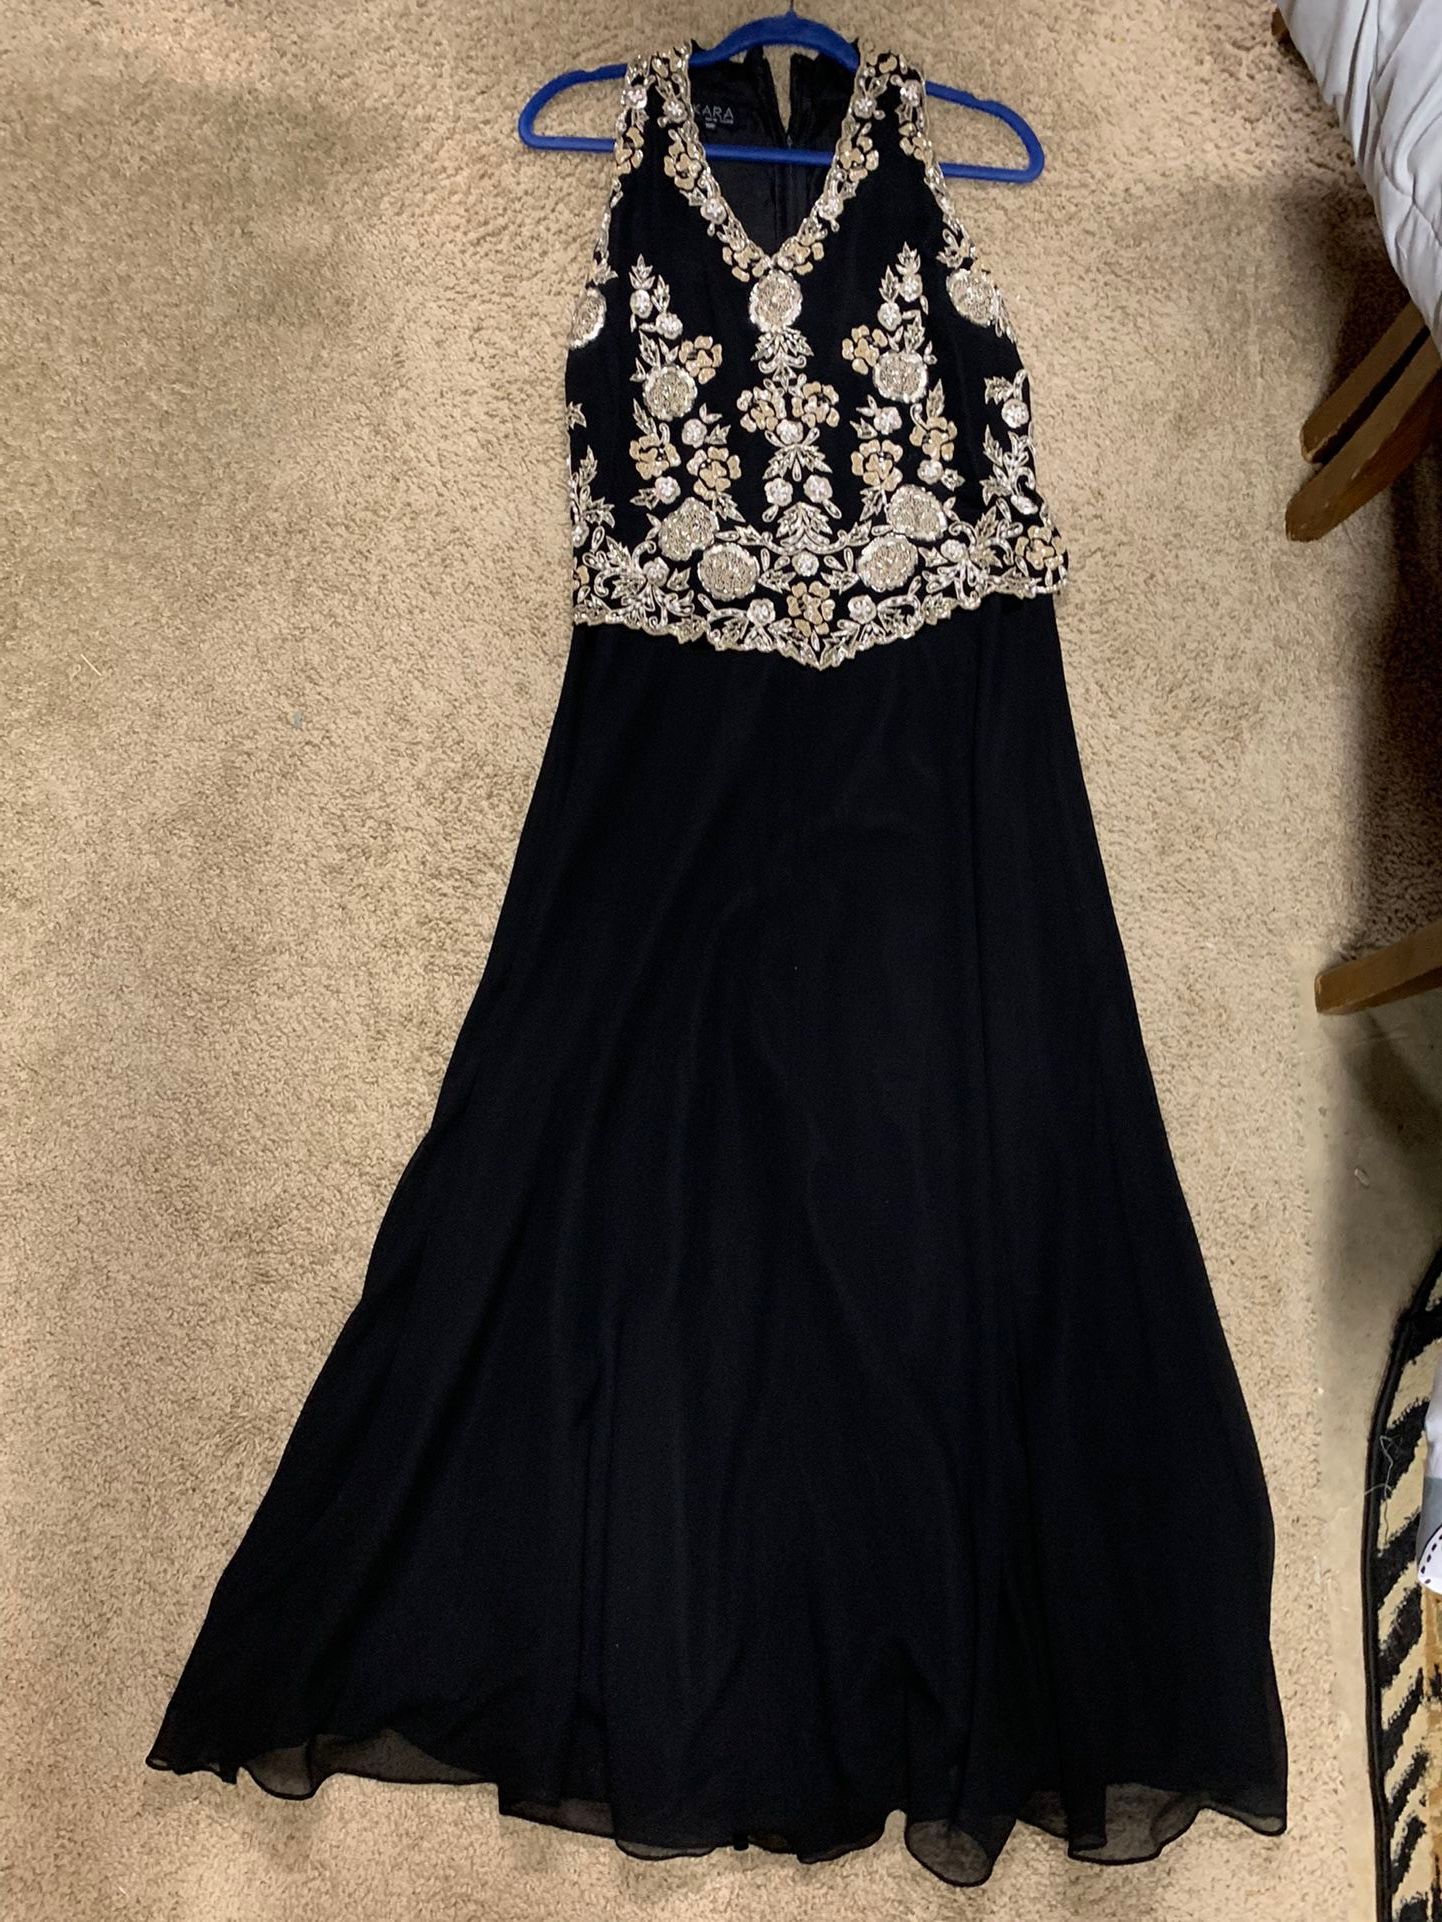 Long Black Dress With Beads Design 